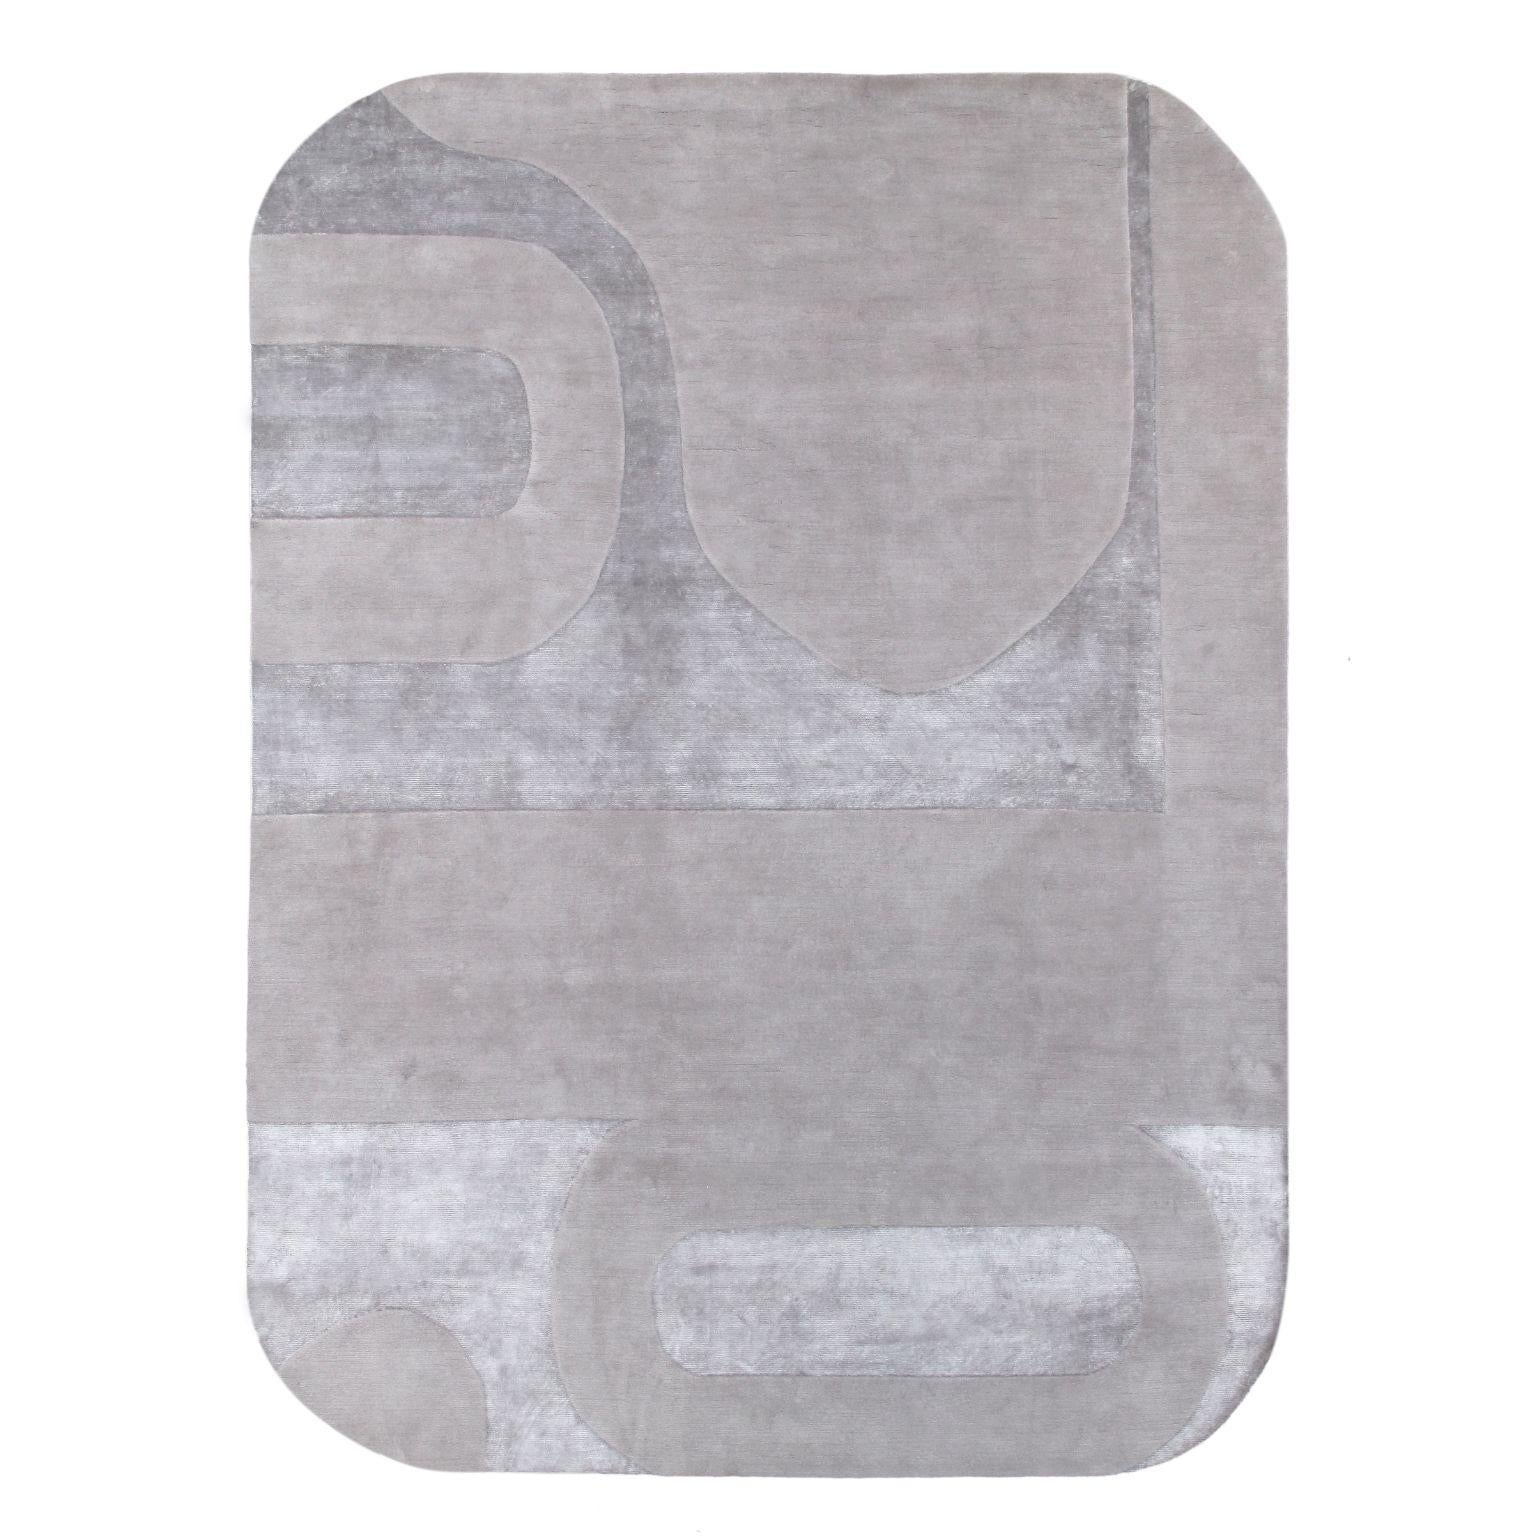 Mod small rug by Art & Loom
Dimensions: D243.4 x H304.8 cm
Materials: New Zealand wool & Chinese silk
Quality (Knots per Inch): 80
Also available in different dimensions.

Samantha Gallacher has always had a keen eye for aesthetics, drawing